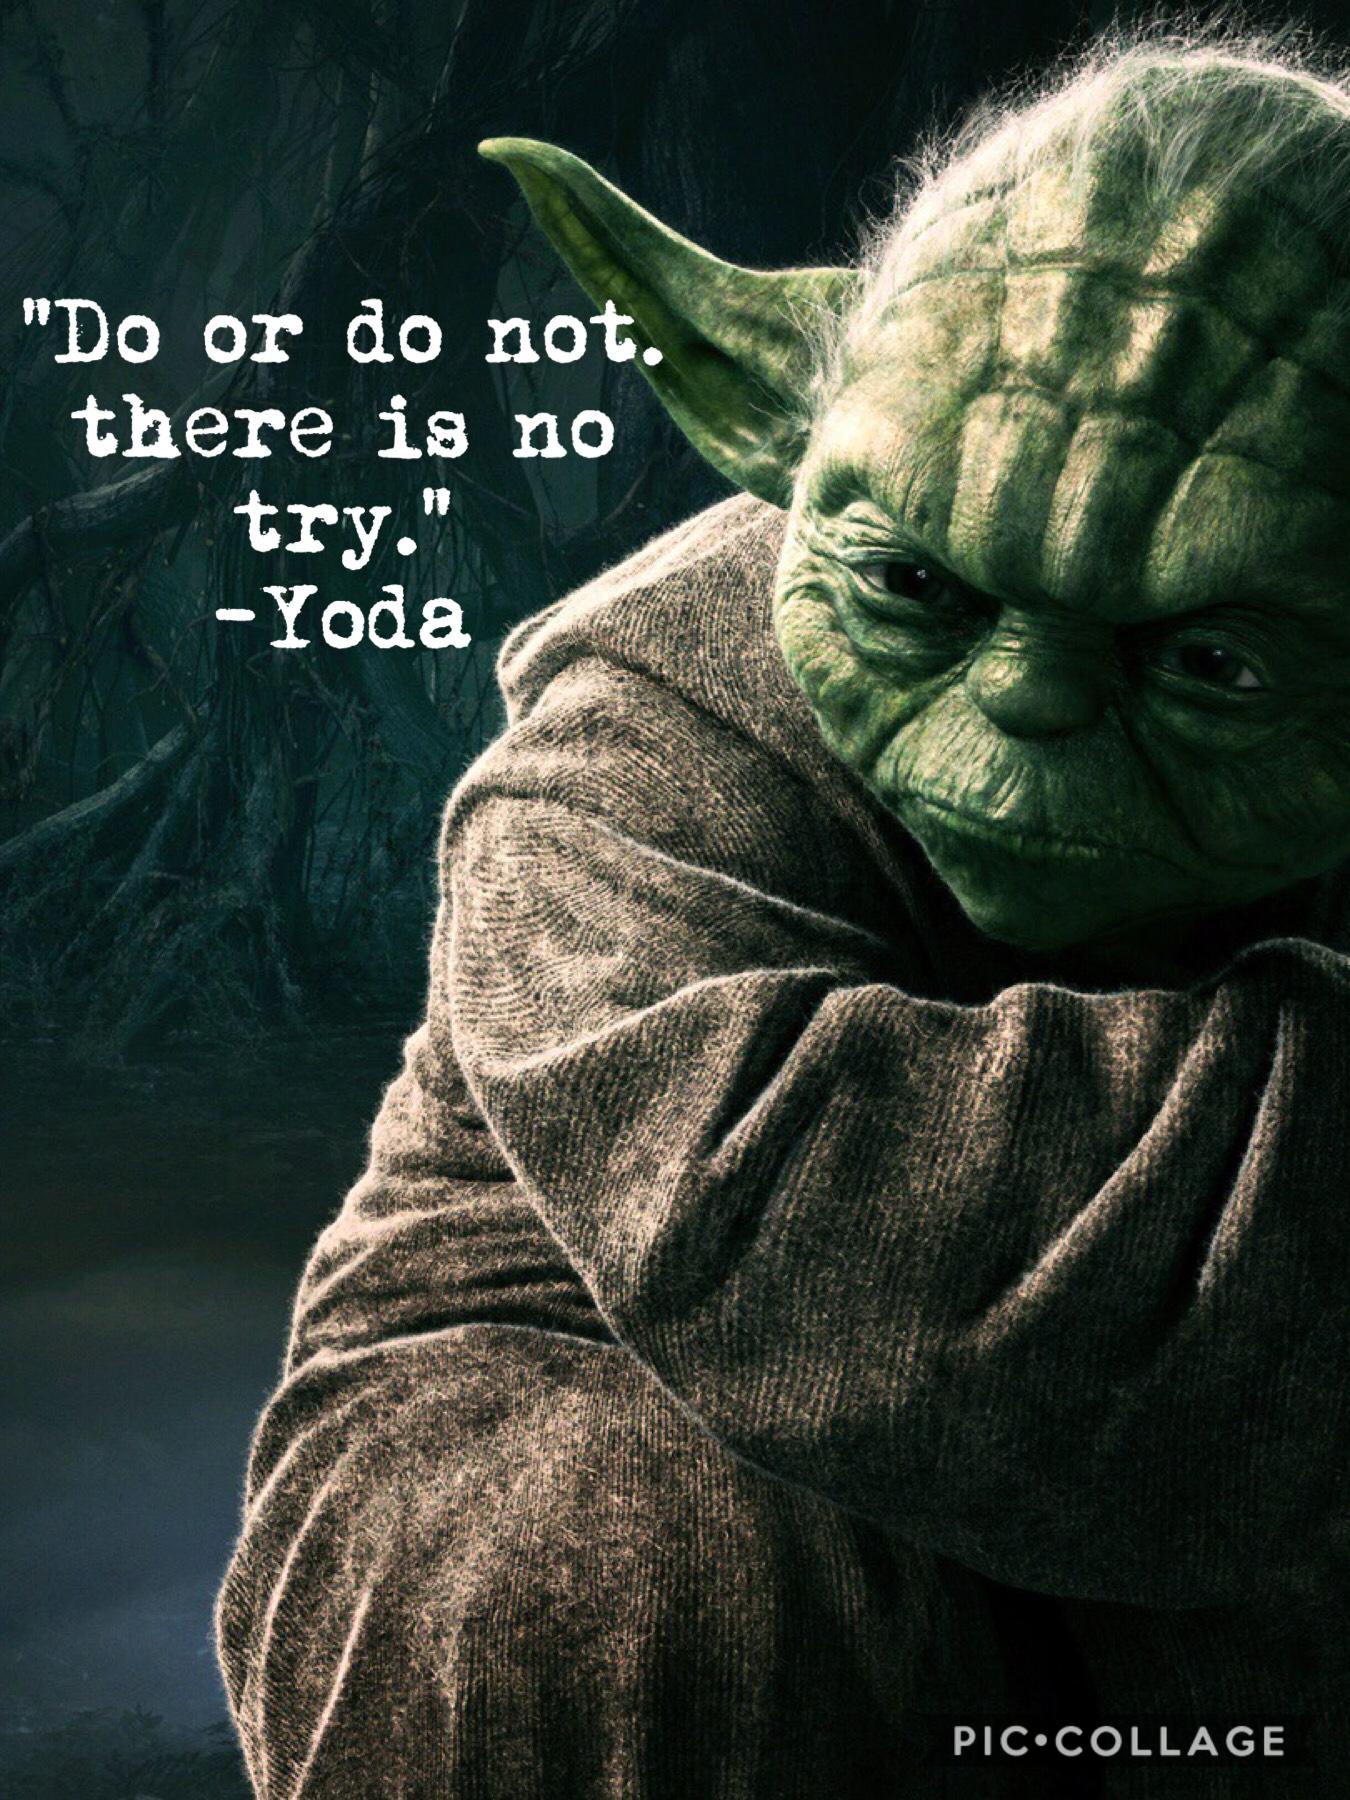 Sorry! I was so busy and didn’t have time to post! 
Believe it or not I ❤️ Star Wars! This is one of the most famous and inspiring quotes from yoda. Hope you like it!